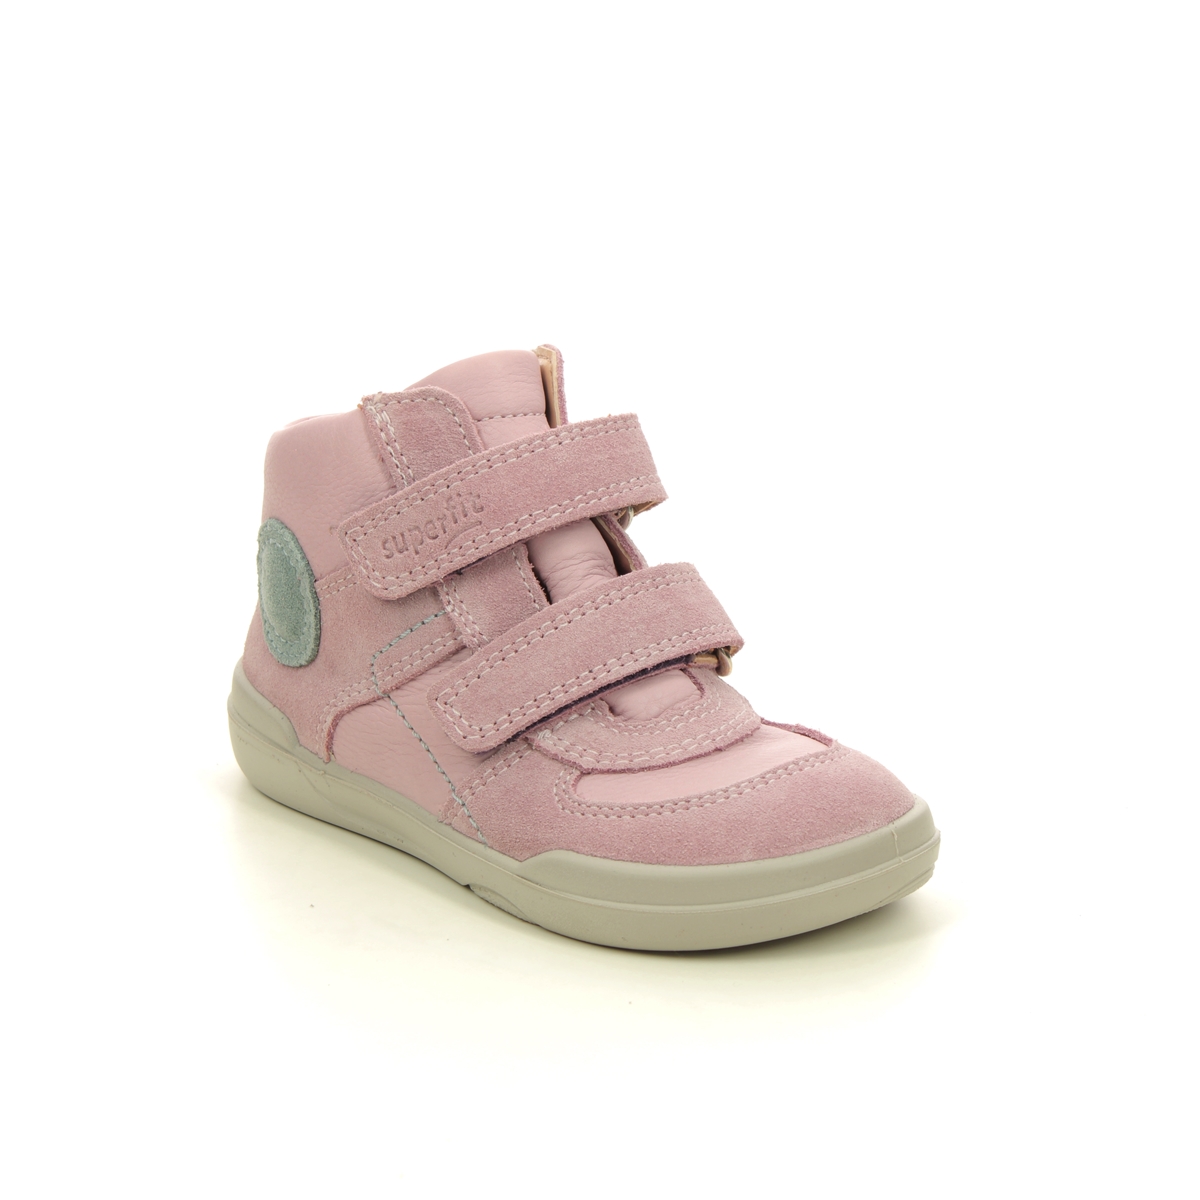 Superfit Superfree Gtx Pink Suede Kids Toddler Girls Boots 1000541-5500 In Size 22 In Plain Pink Suede